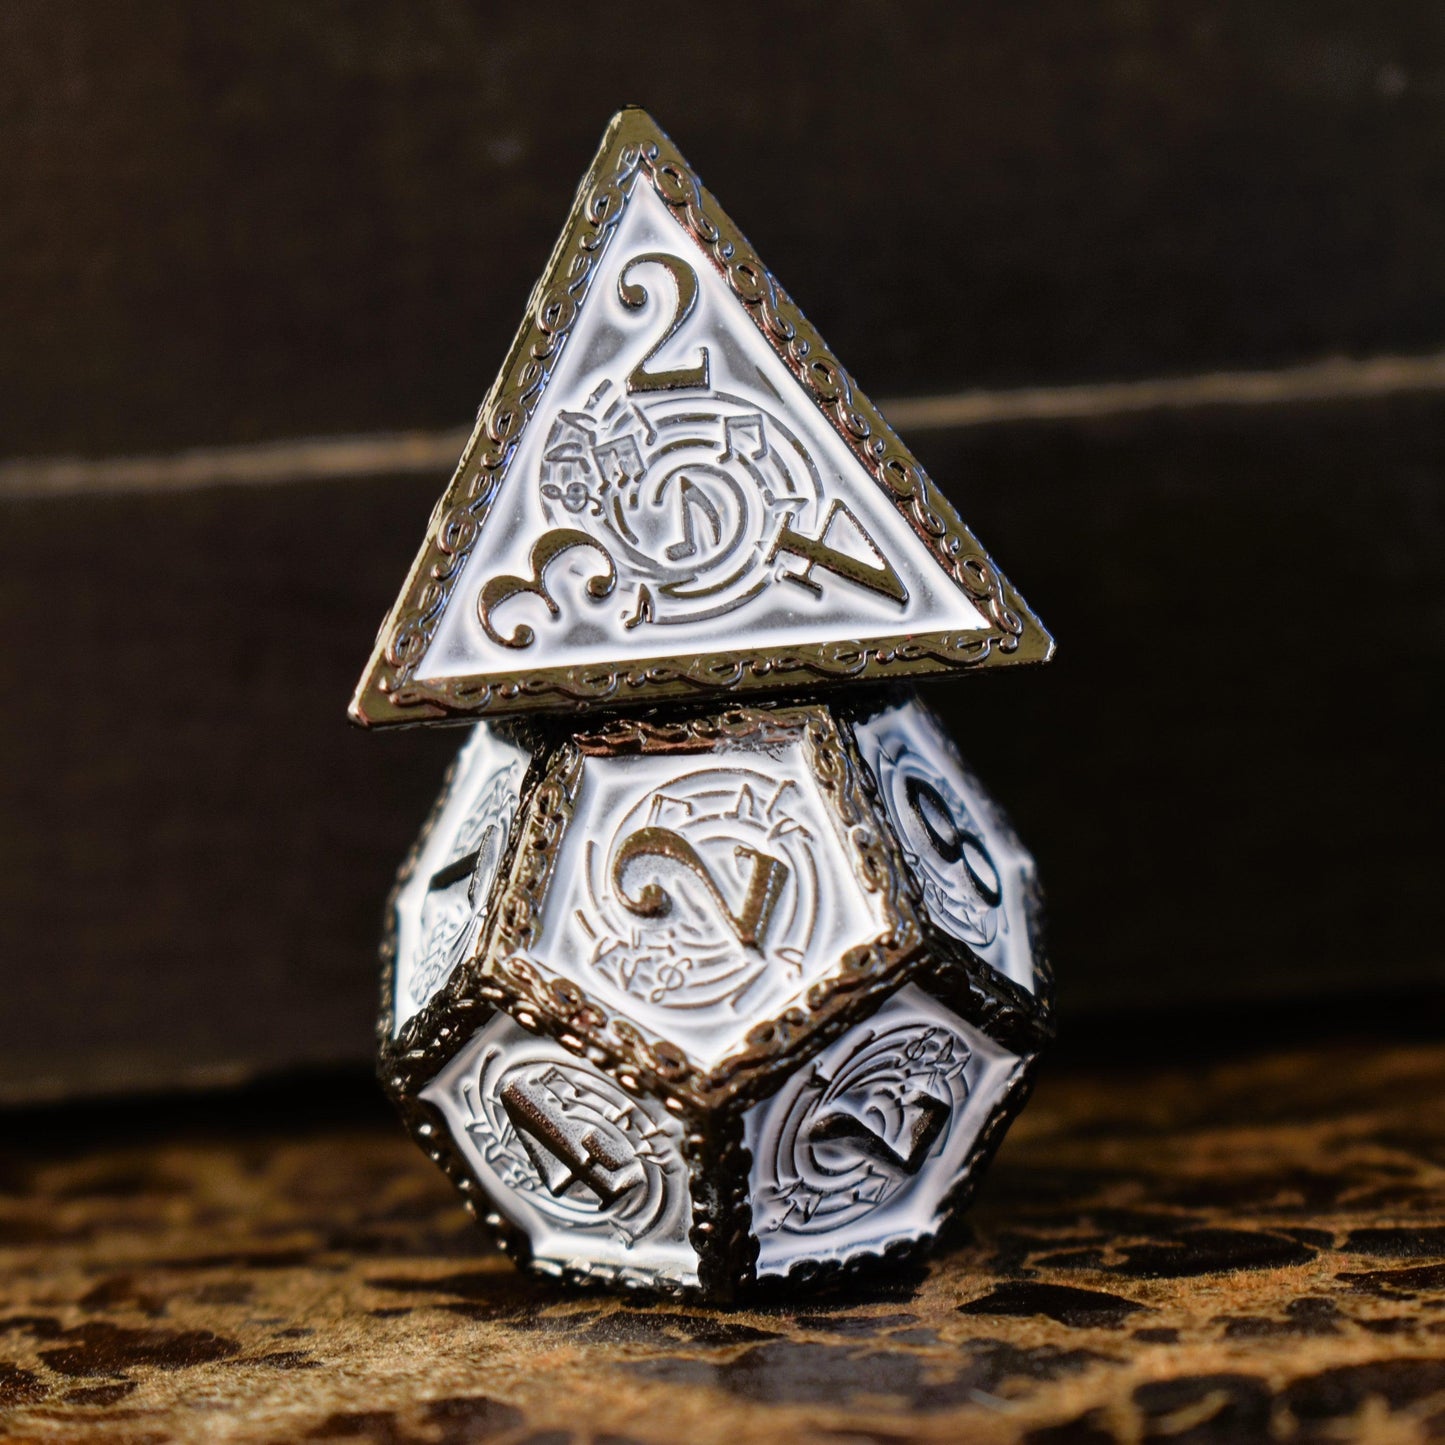 Ballad of the Bard Black and White Metal Dice Set